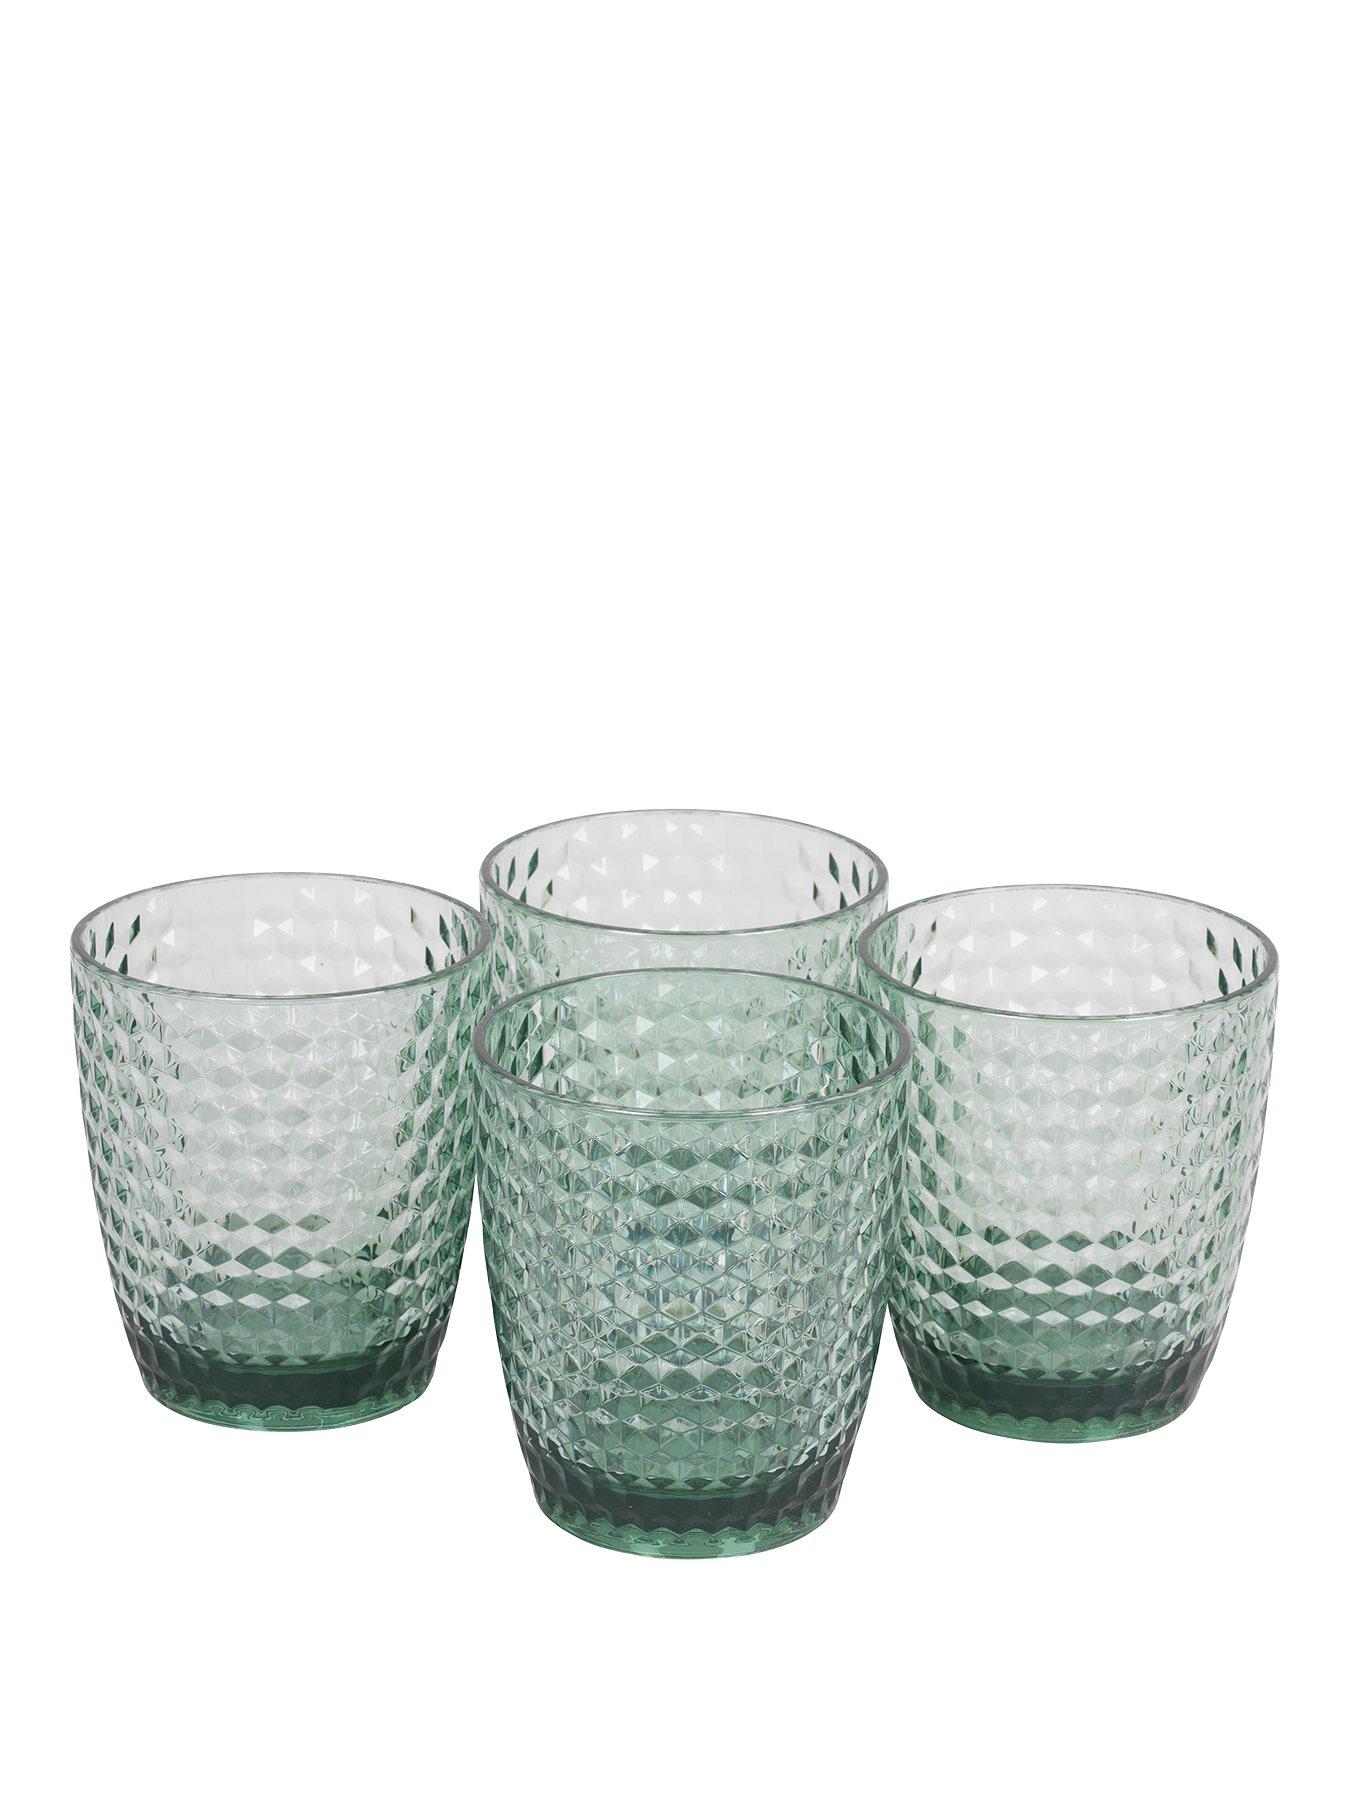 Made in Europe Crystal Tumbler Glasses Mouth Blown Hand Cut Set of 6 Each Glass is 16 oz - Uniquely Designed Barski Highball- Hiball Tumblers 